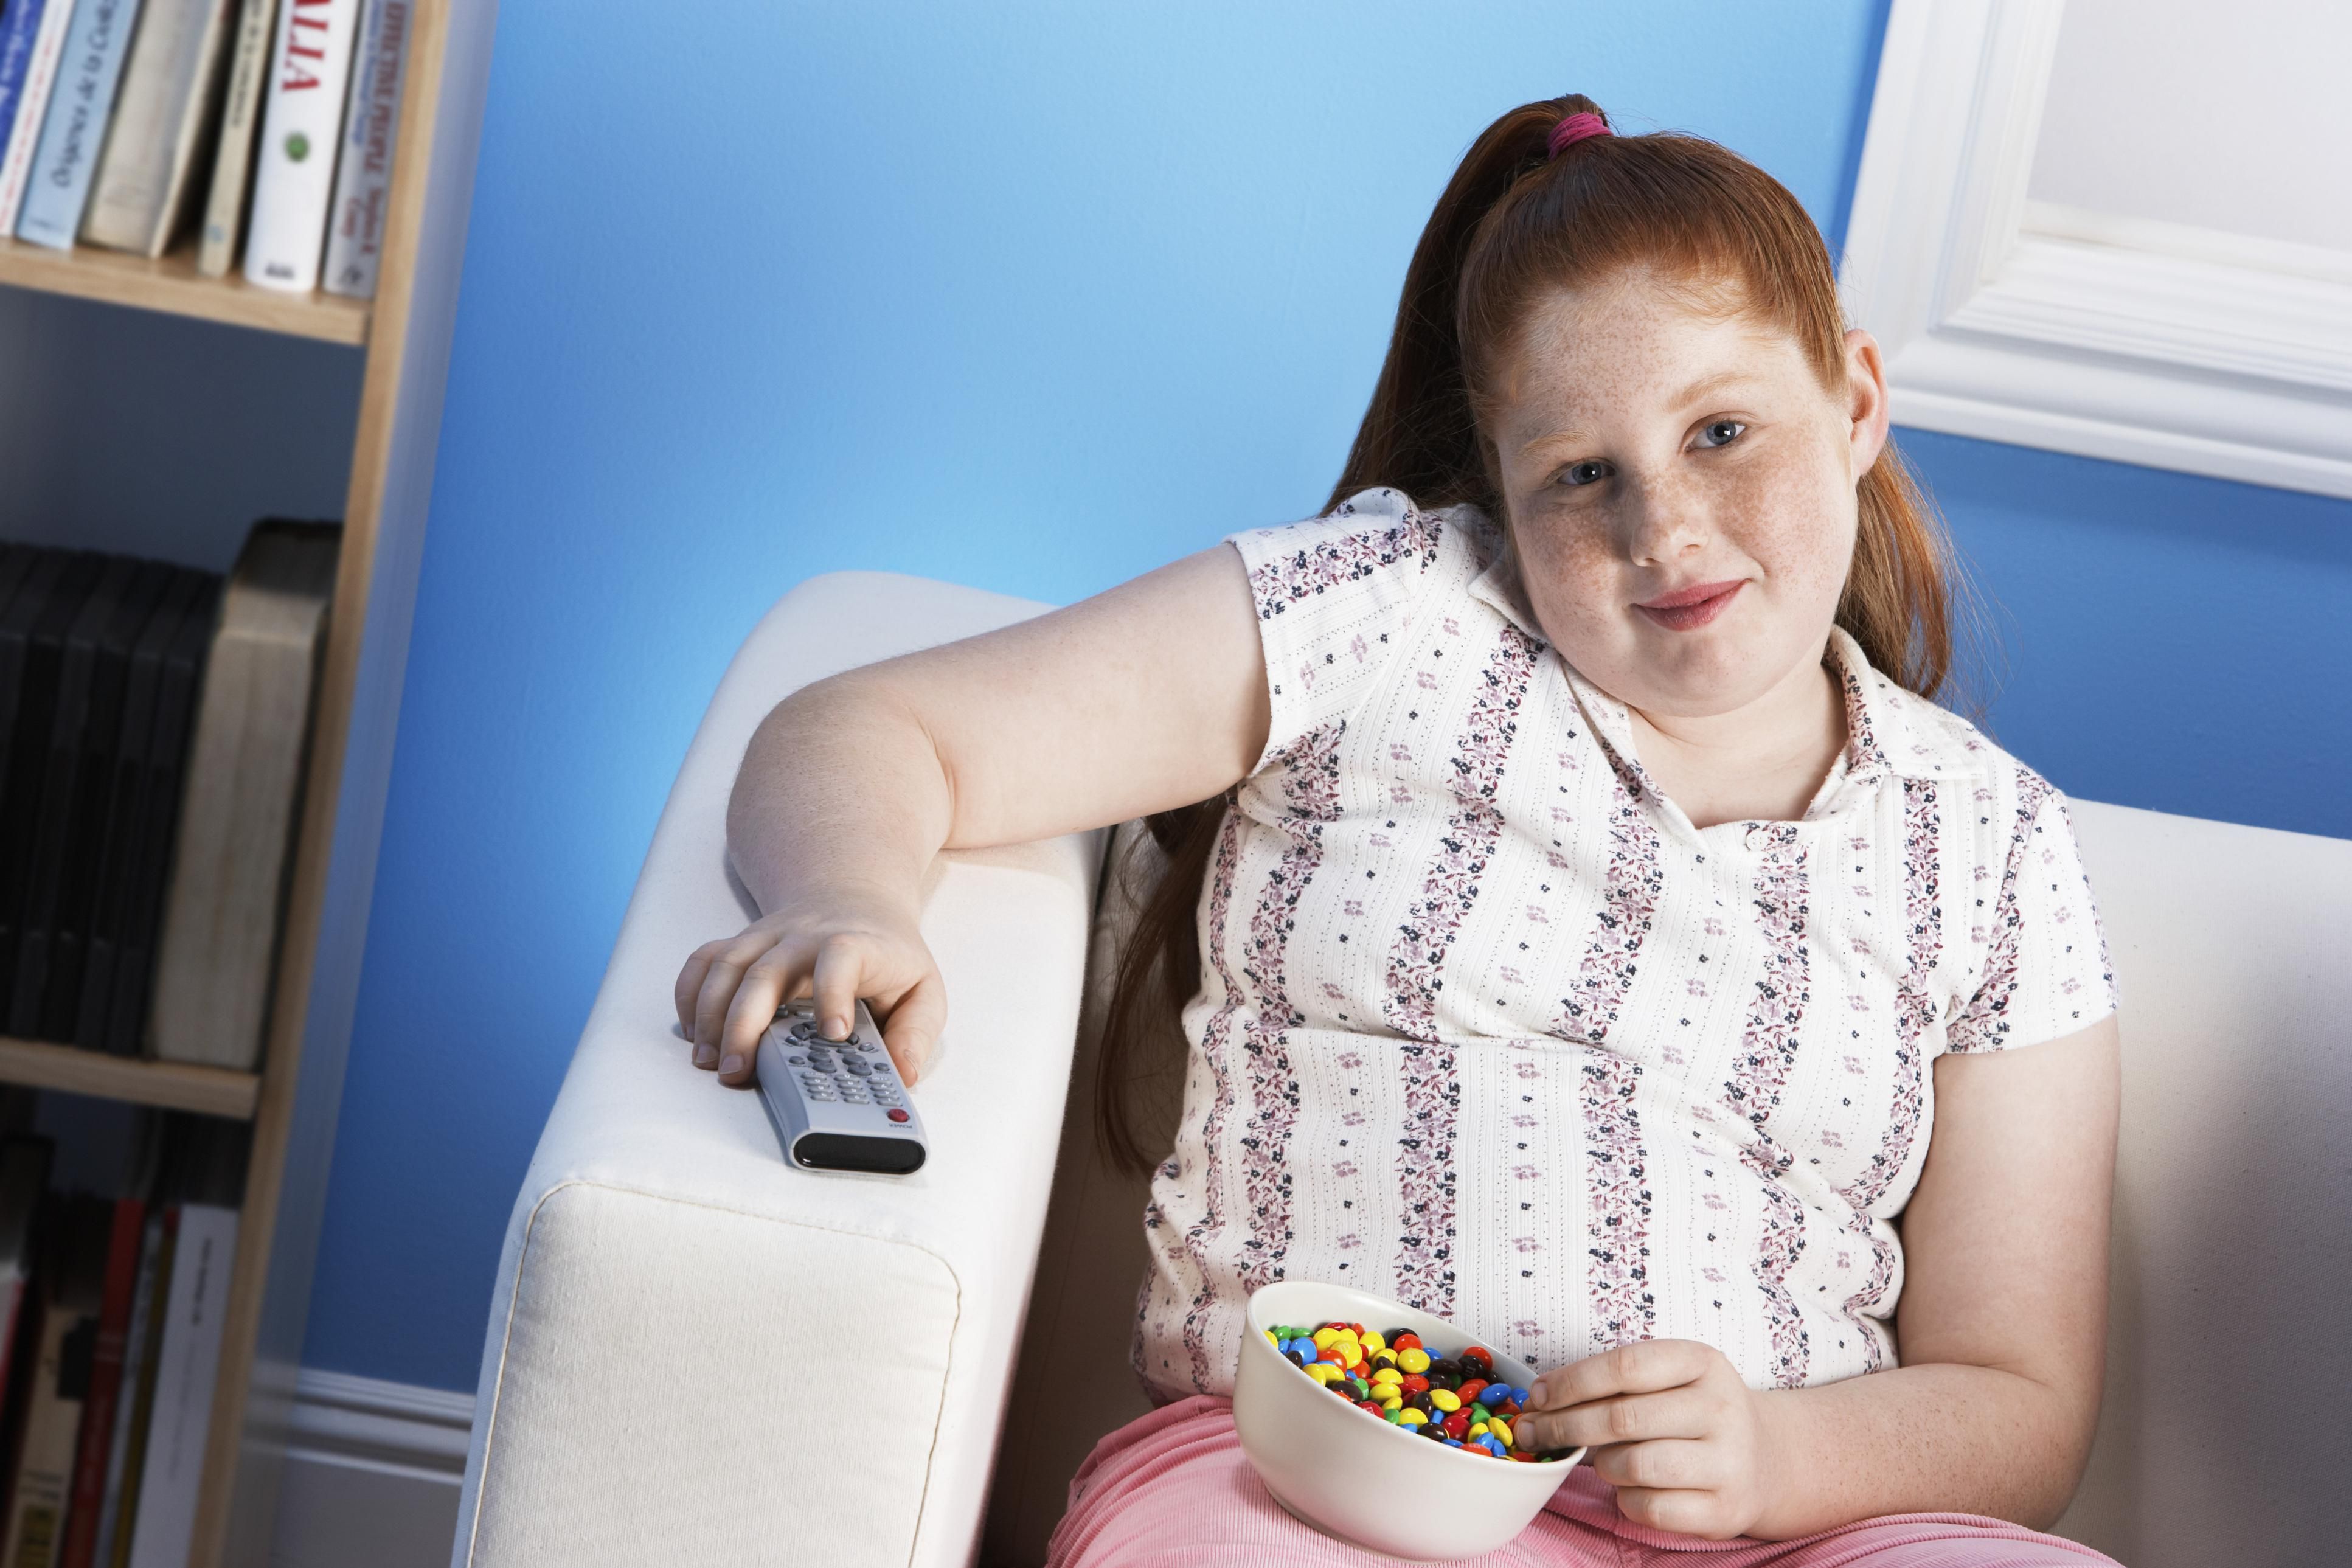 The Psychological And Physical Effects Of Obesity